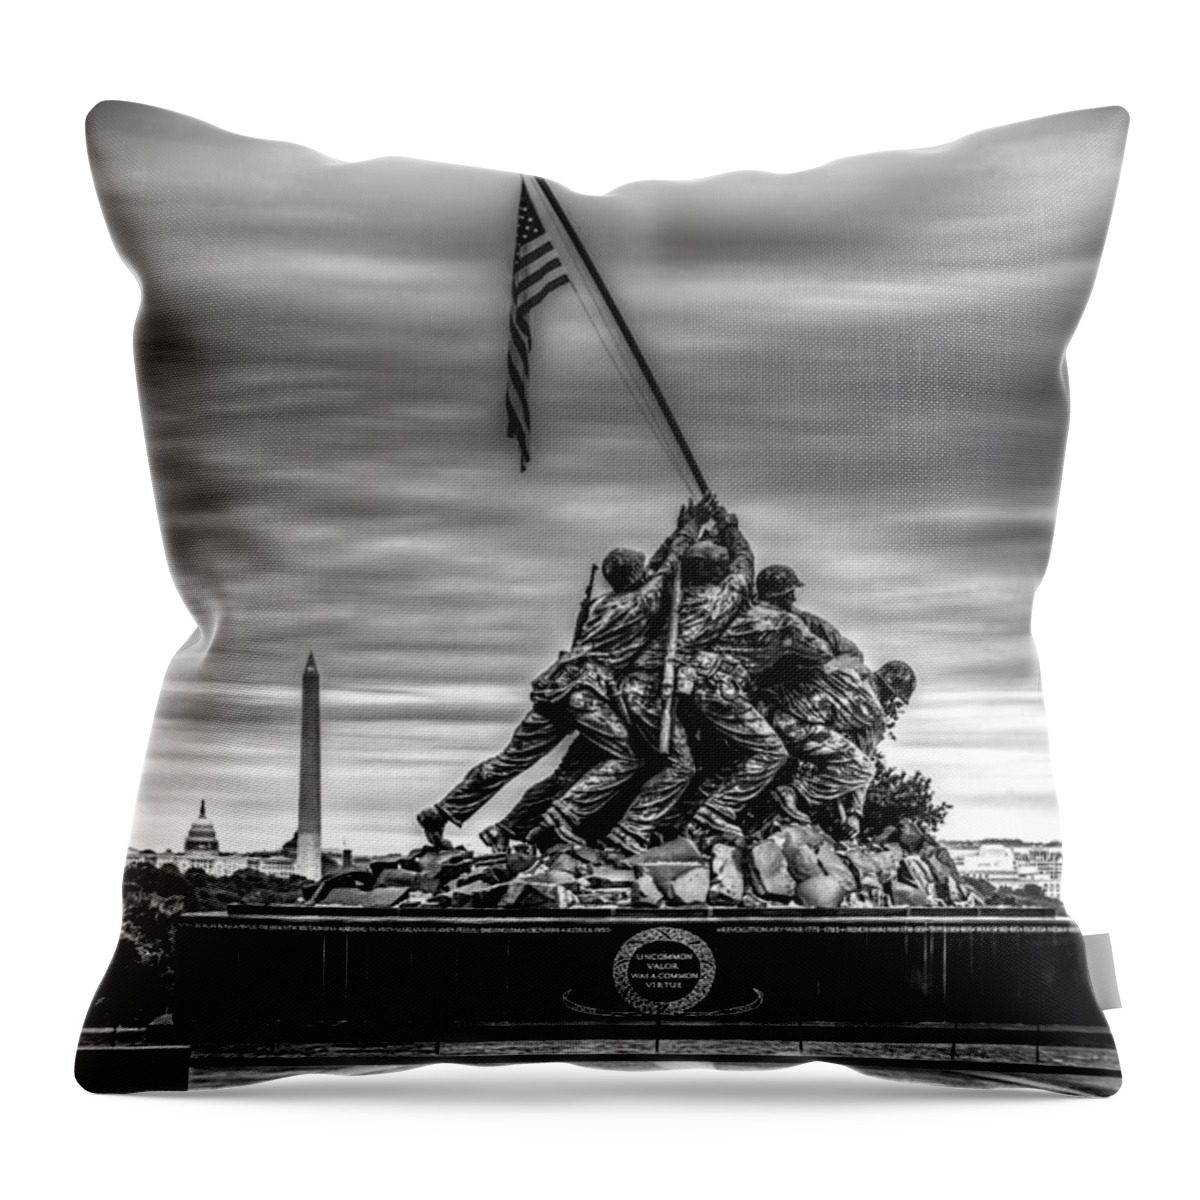 Iwo Jima Monument Throw Pillow featuring the photograph Iwo Jima Monument Black and White by David Morefield